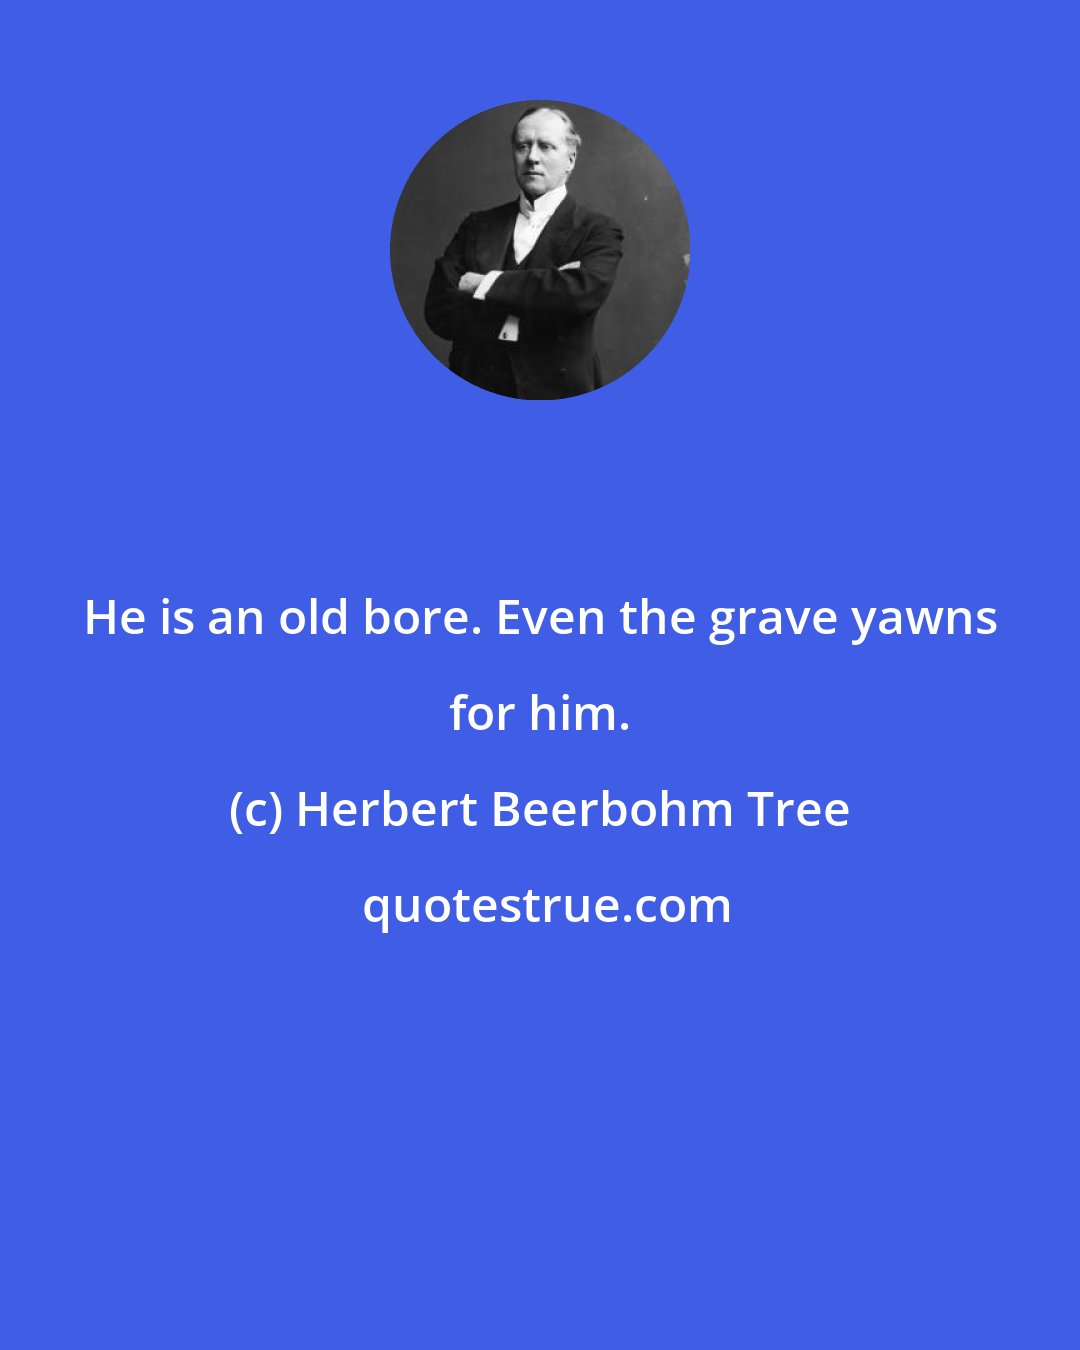 Herbert Beerbohm Tree: He is an old bore. Even the grave yawns for him.